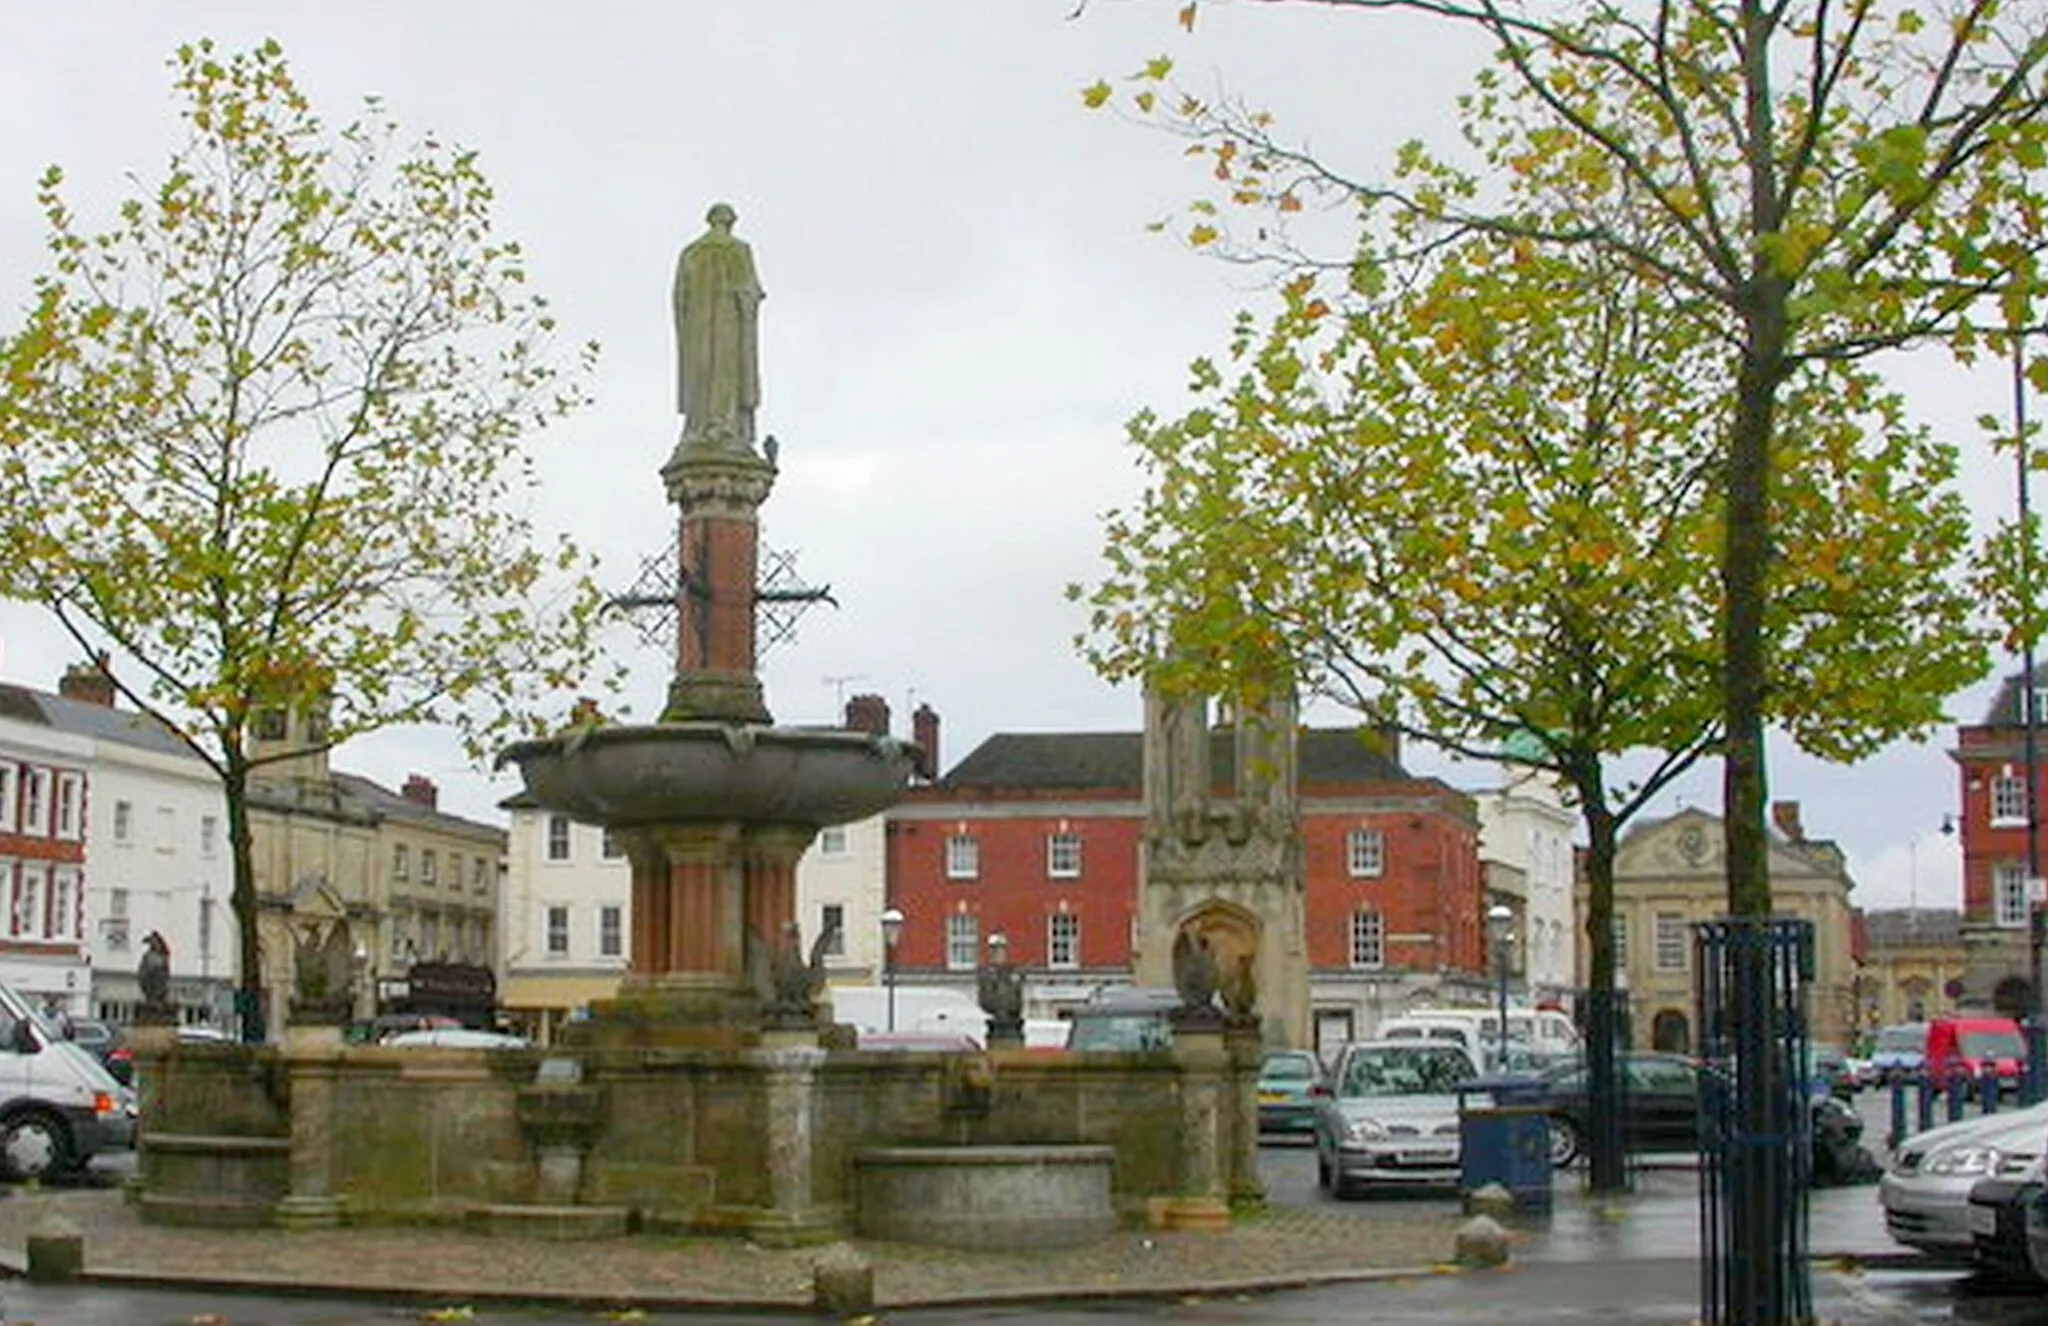 Photo showing: Monument & Fountain, Market Square, Devizes.
A complicated structure combining statue, fountain and reservoir.
Inscription under the bowl says everything you need to know: Erected MDCCCLXXIX (1879) by public subscription to the memory of the Right Honble Thomas H.S. Sotheron Astcourt Member of Parliament for Marlborough Devizes & North Wilts for a period of XXXIII years founder of the Friendly Socty. Wiltshire".